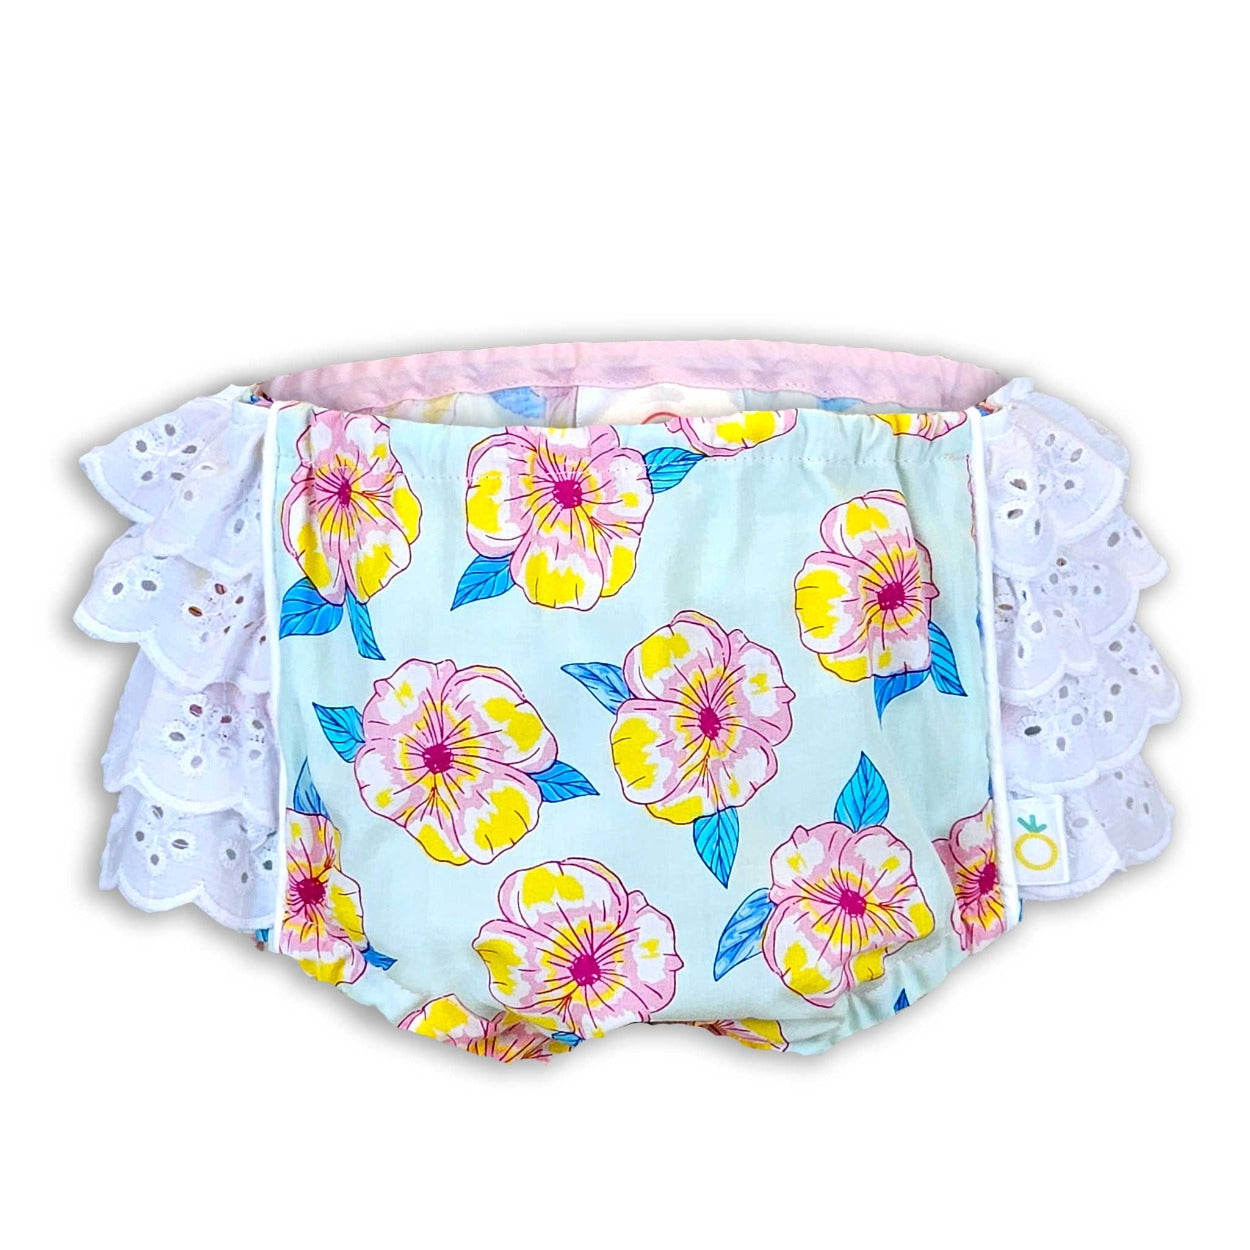 Bloomers bottoms baby lace blue pink